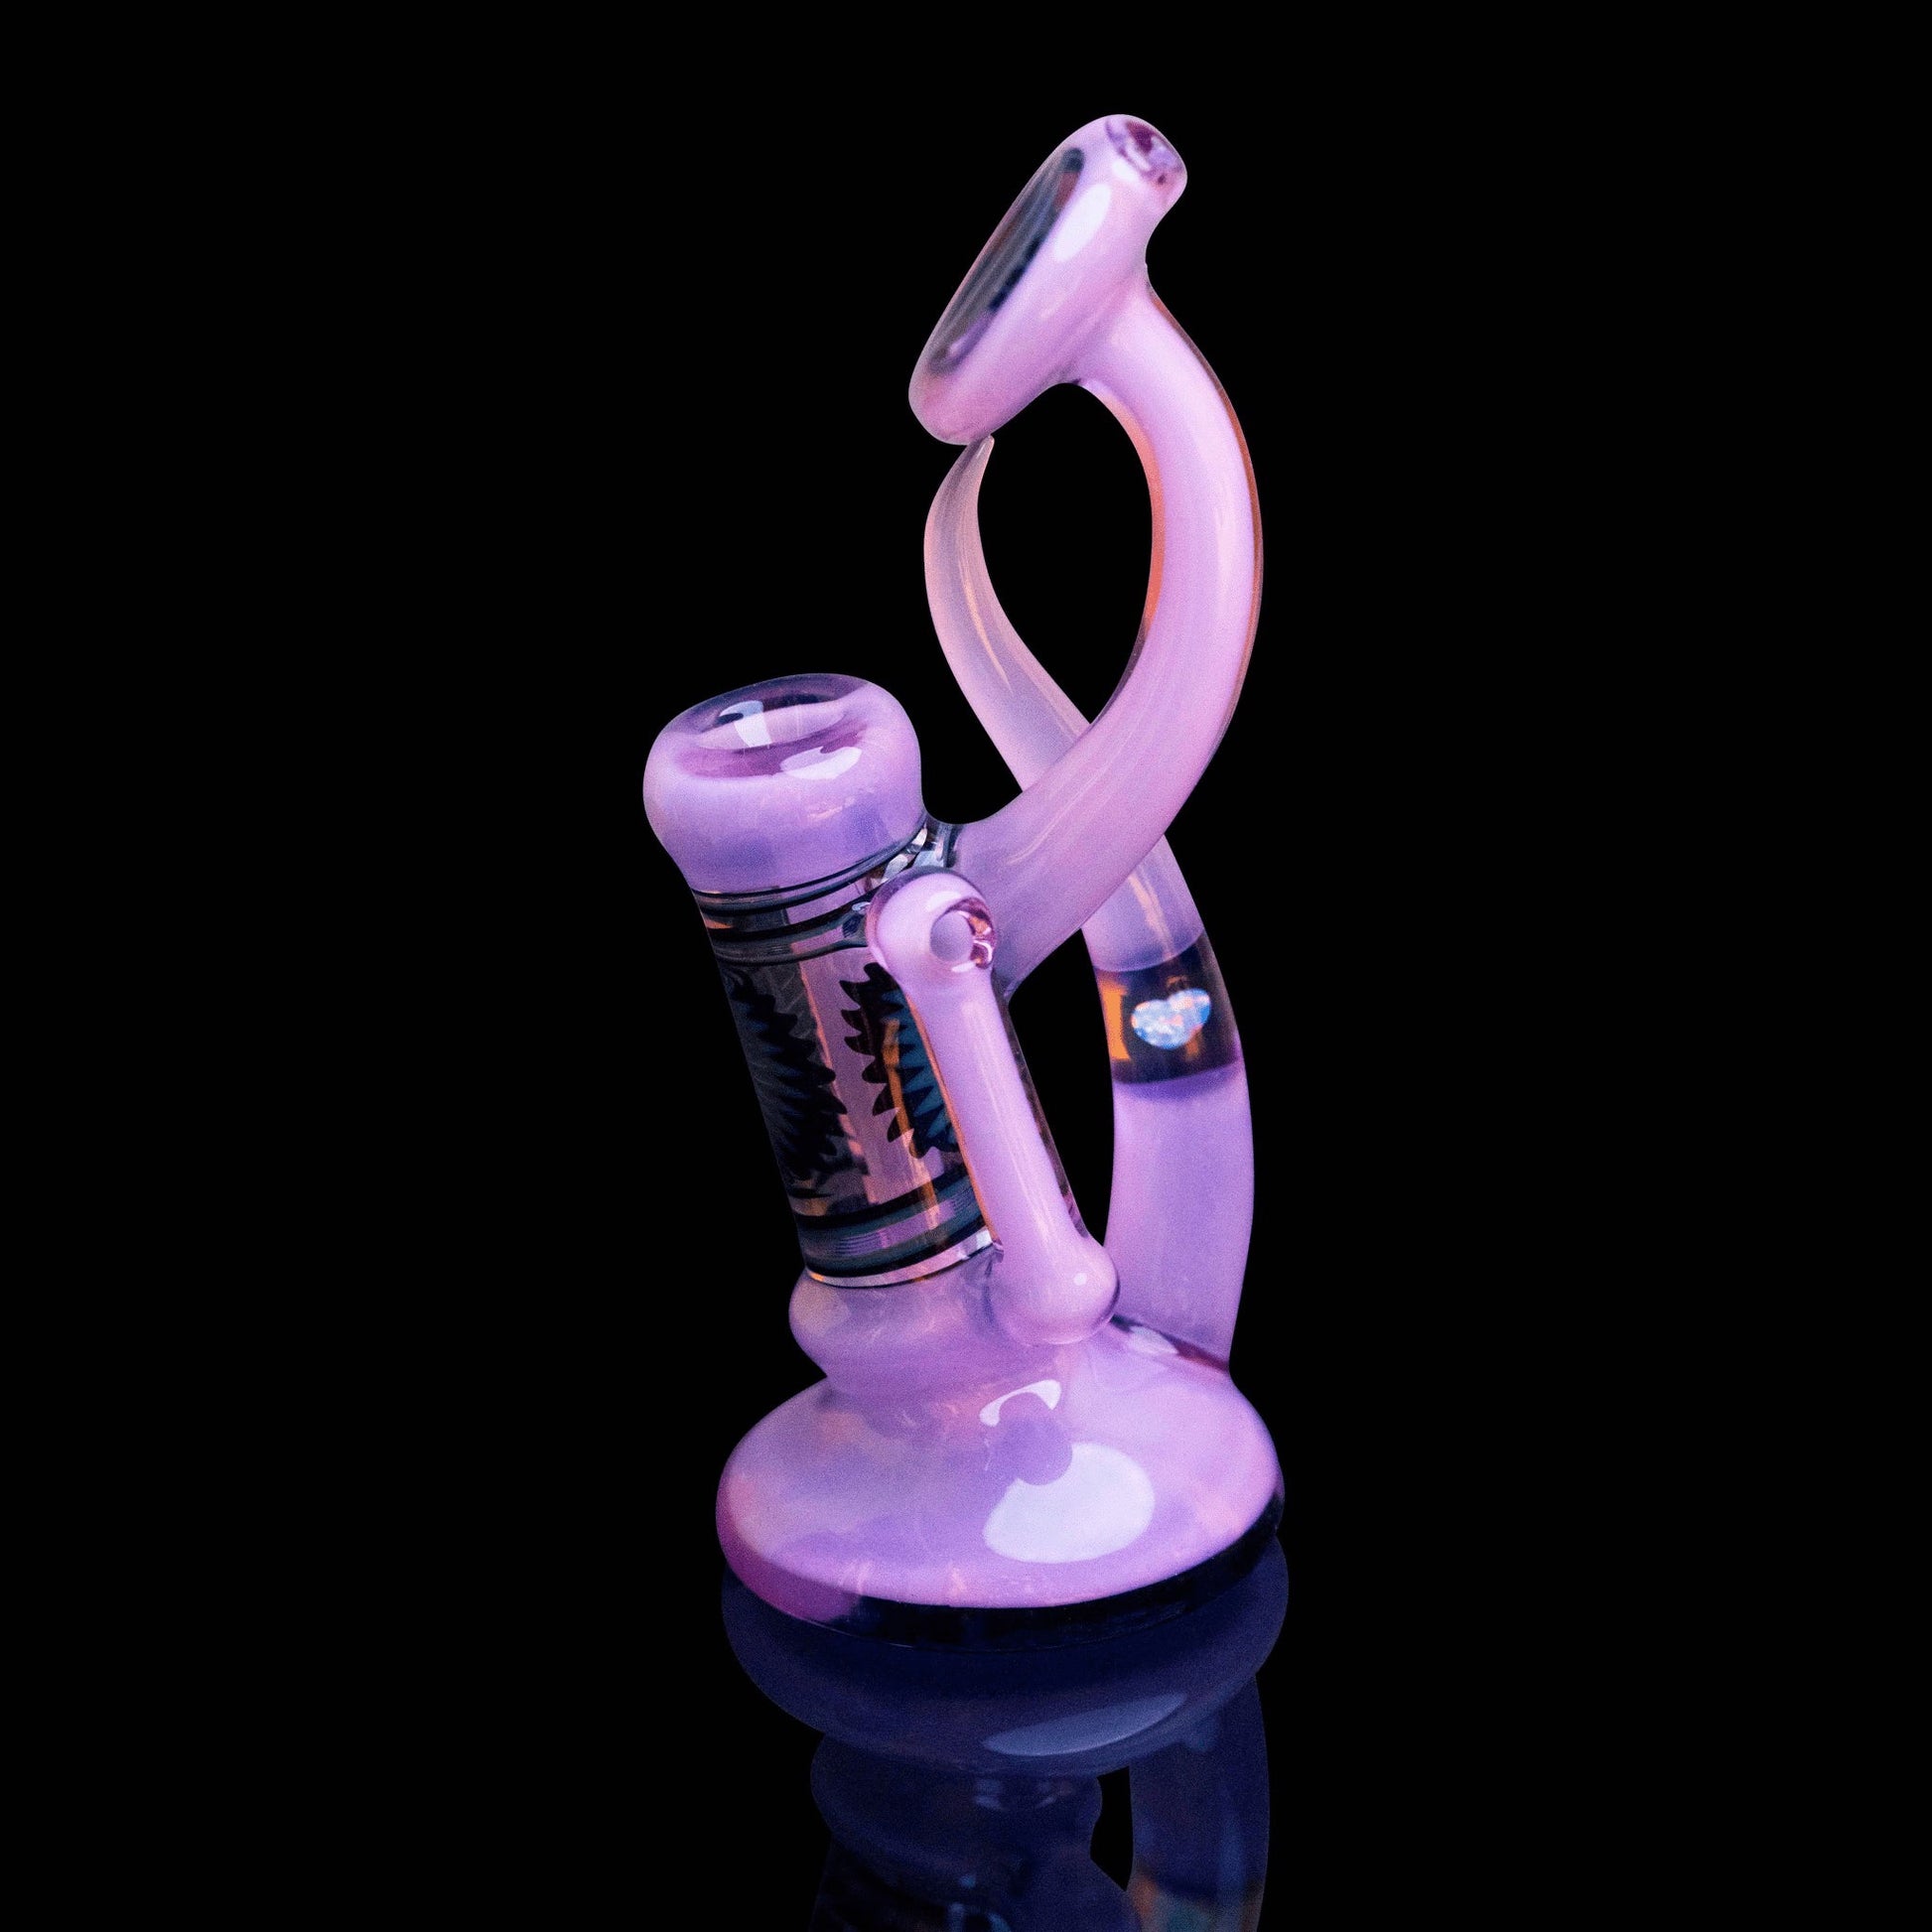 artisan-crafted design of the Purple Bubbler by Nateylove (2021)